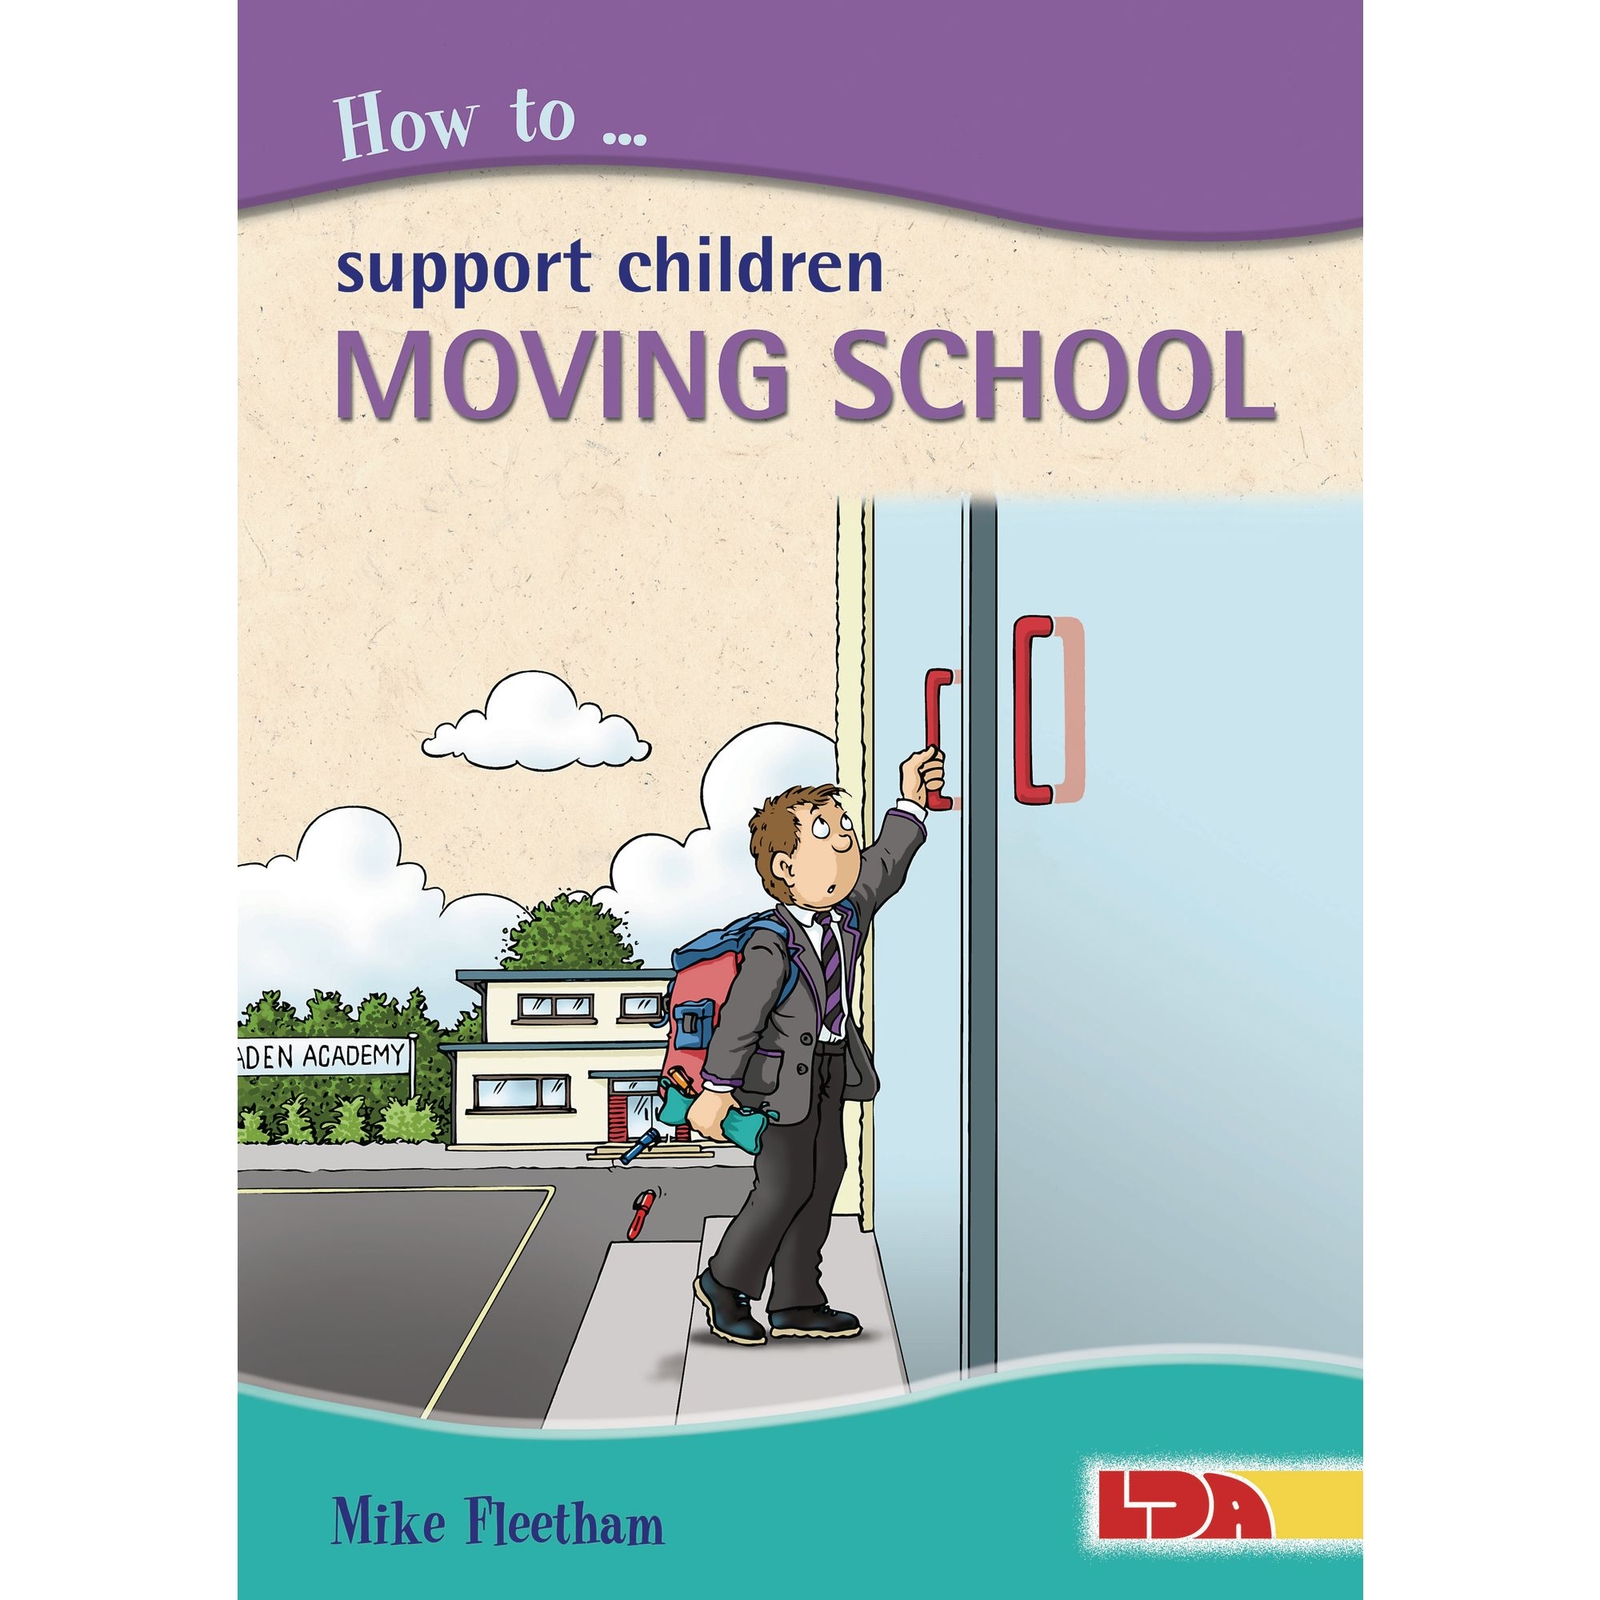 How To Support Children Moving School